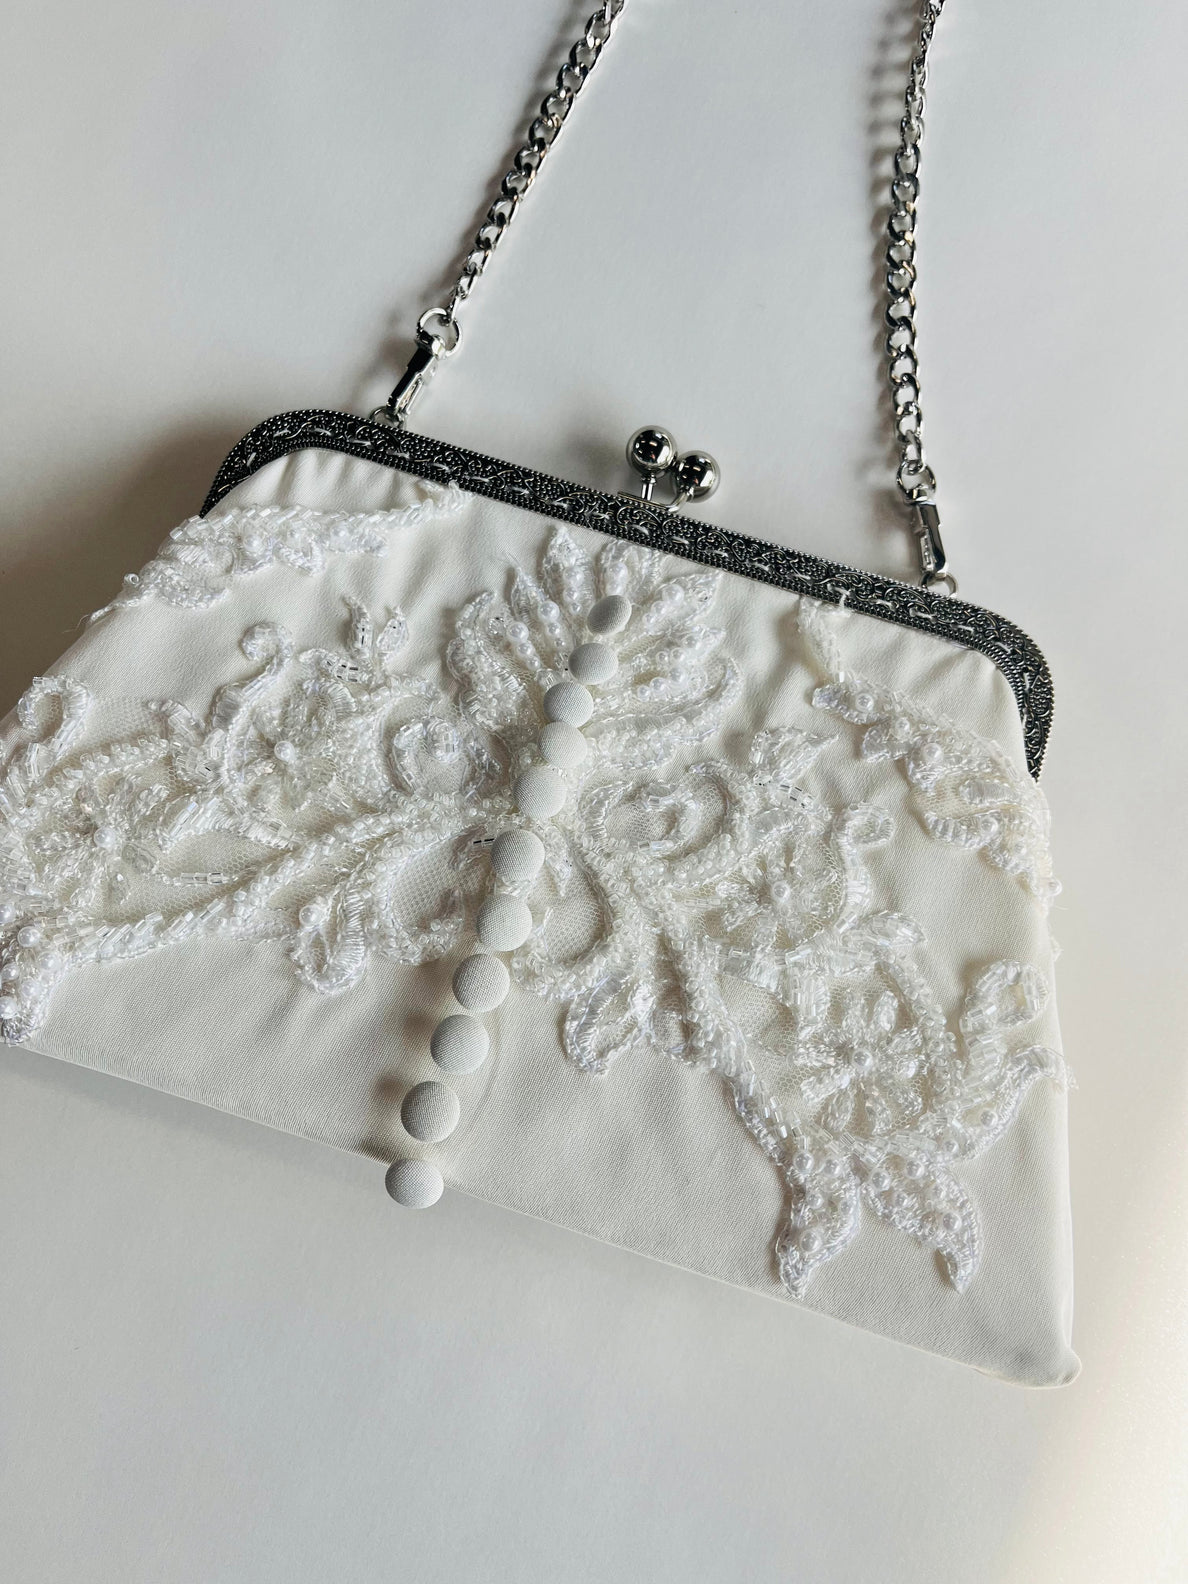 Hand Crafted Ivory Clutch Purse With Peach Flower Adornments by The Button  Tree Co. | CustomMade.com